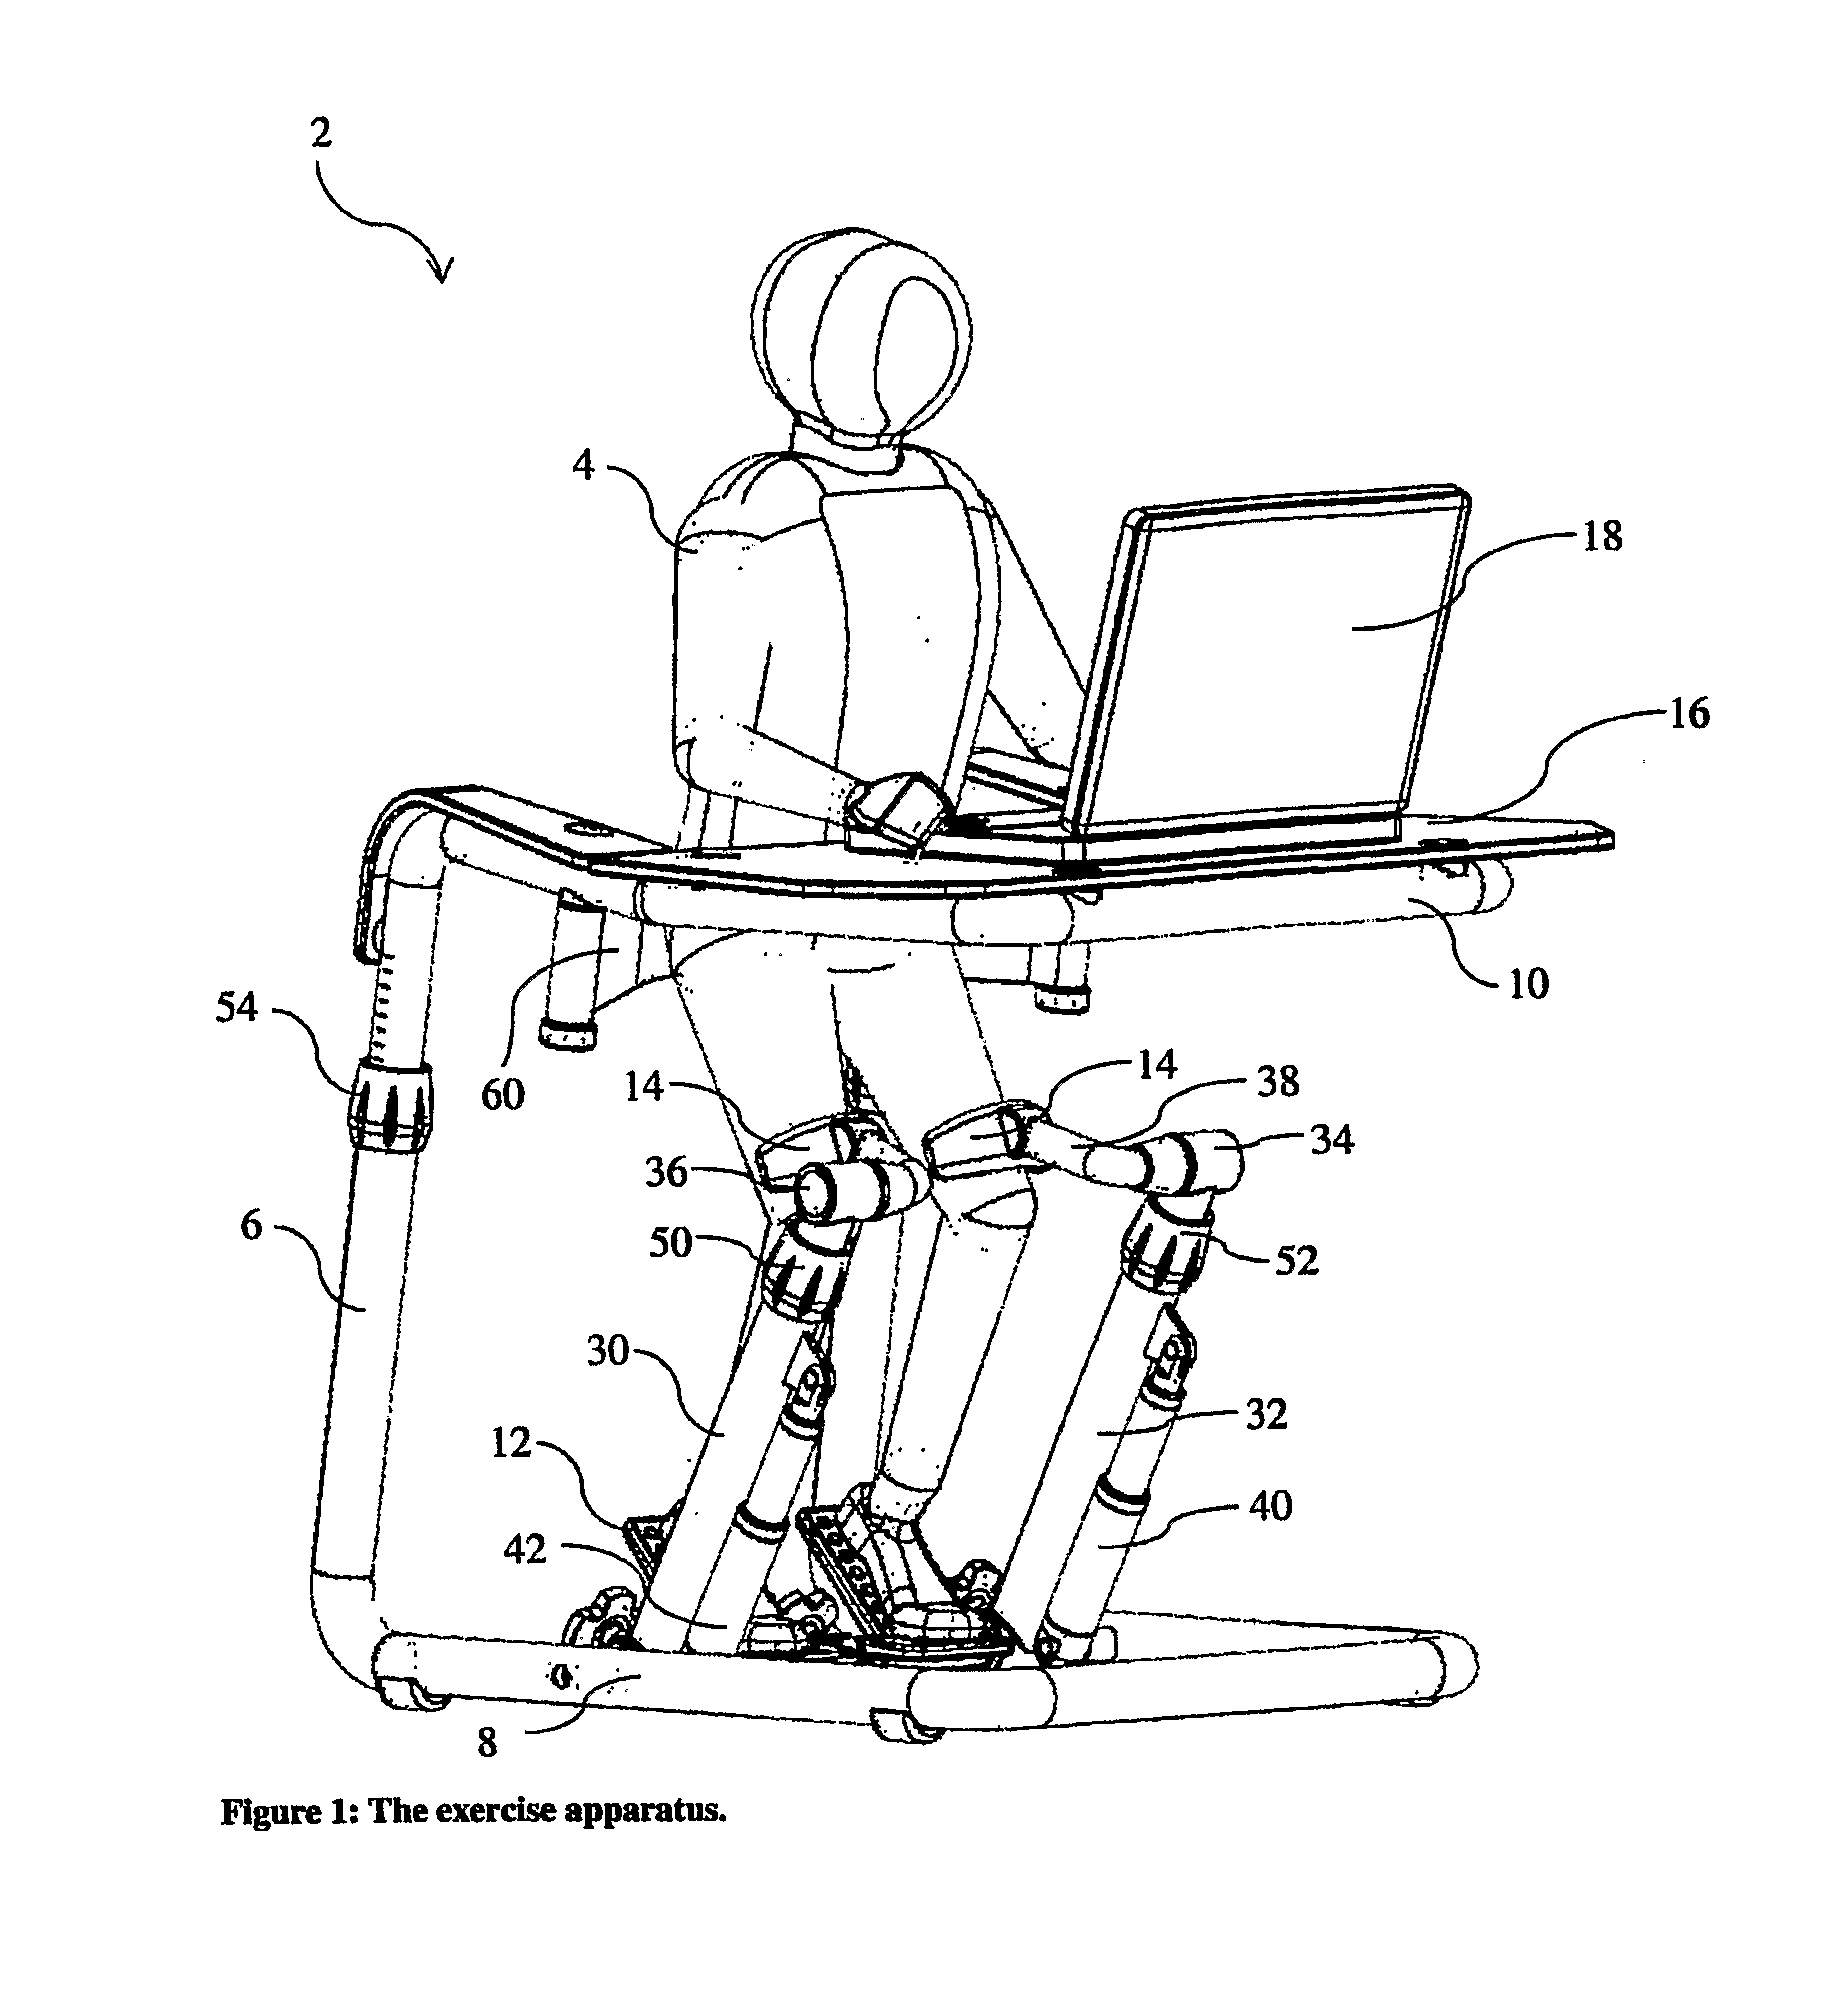 Exercise equipment intended for exercising legs of a person